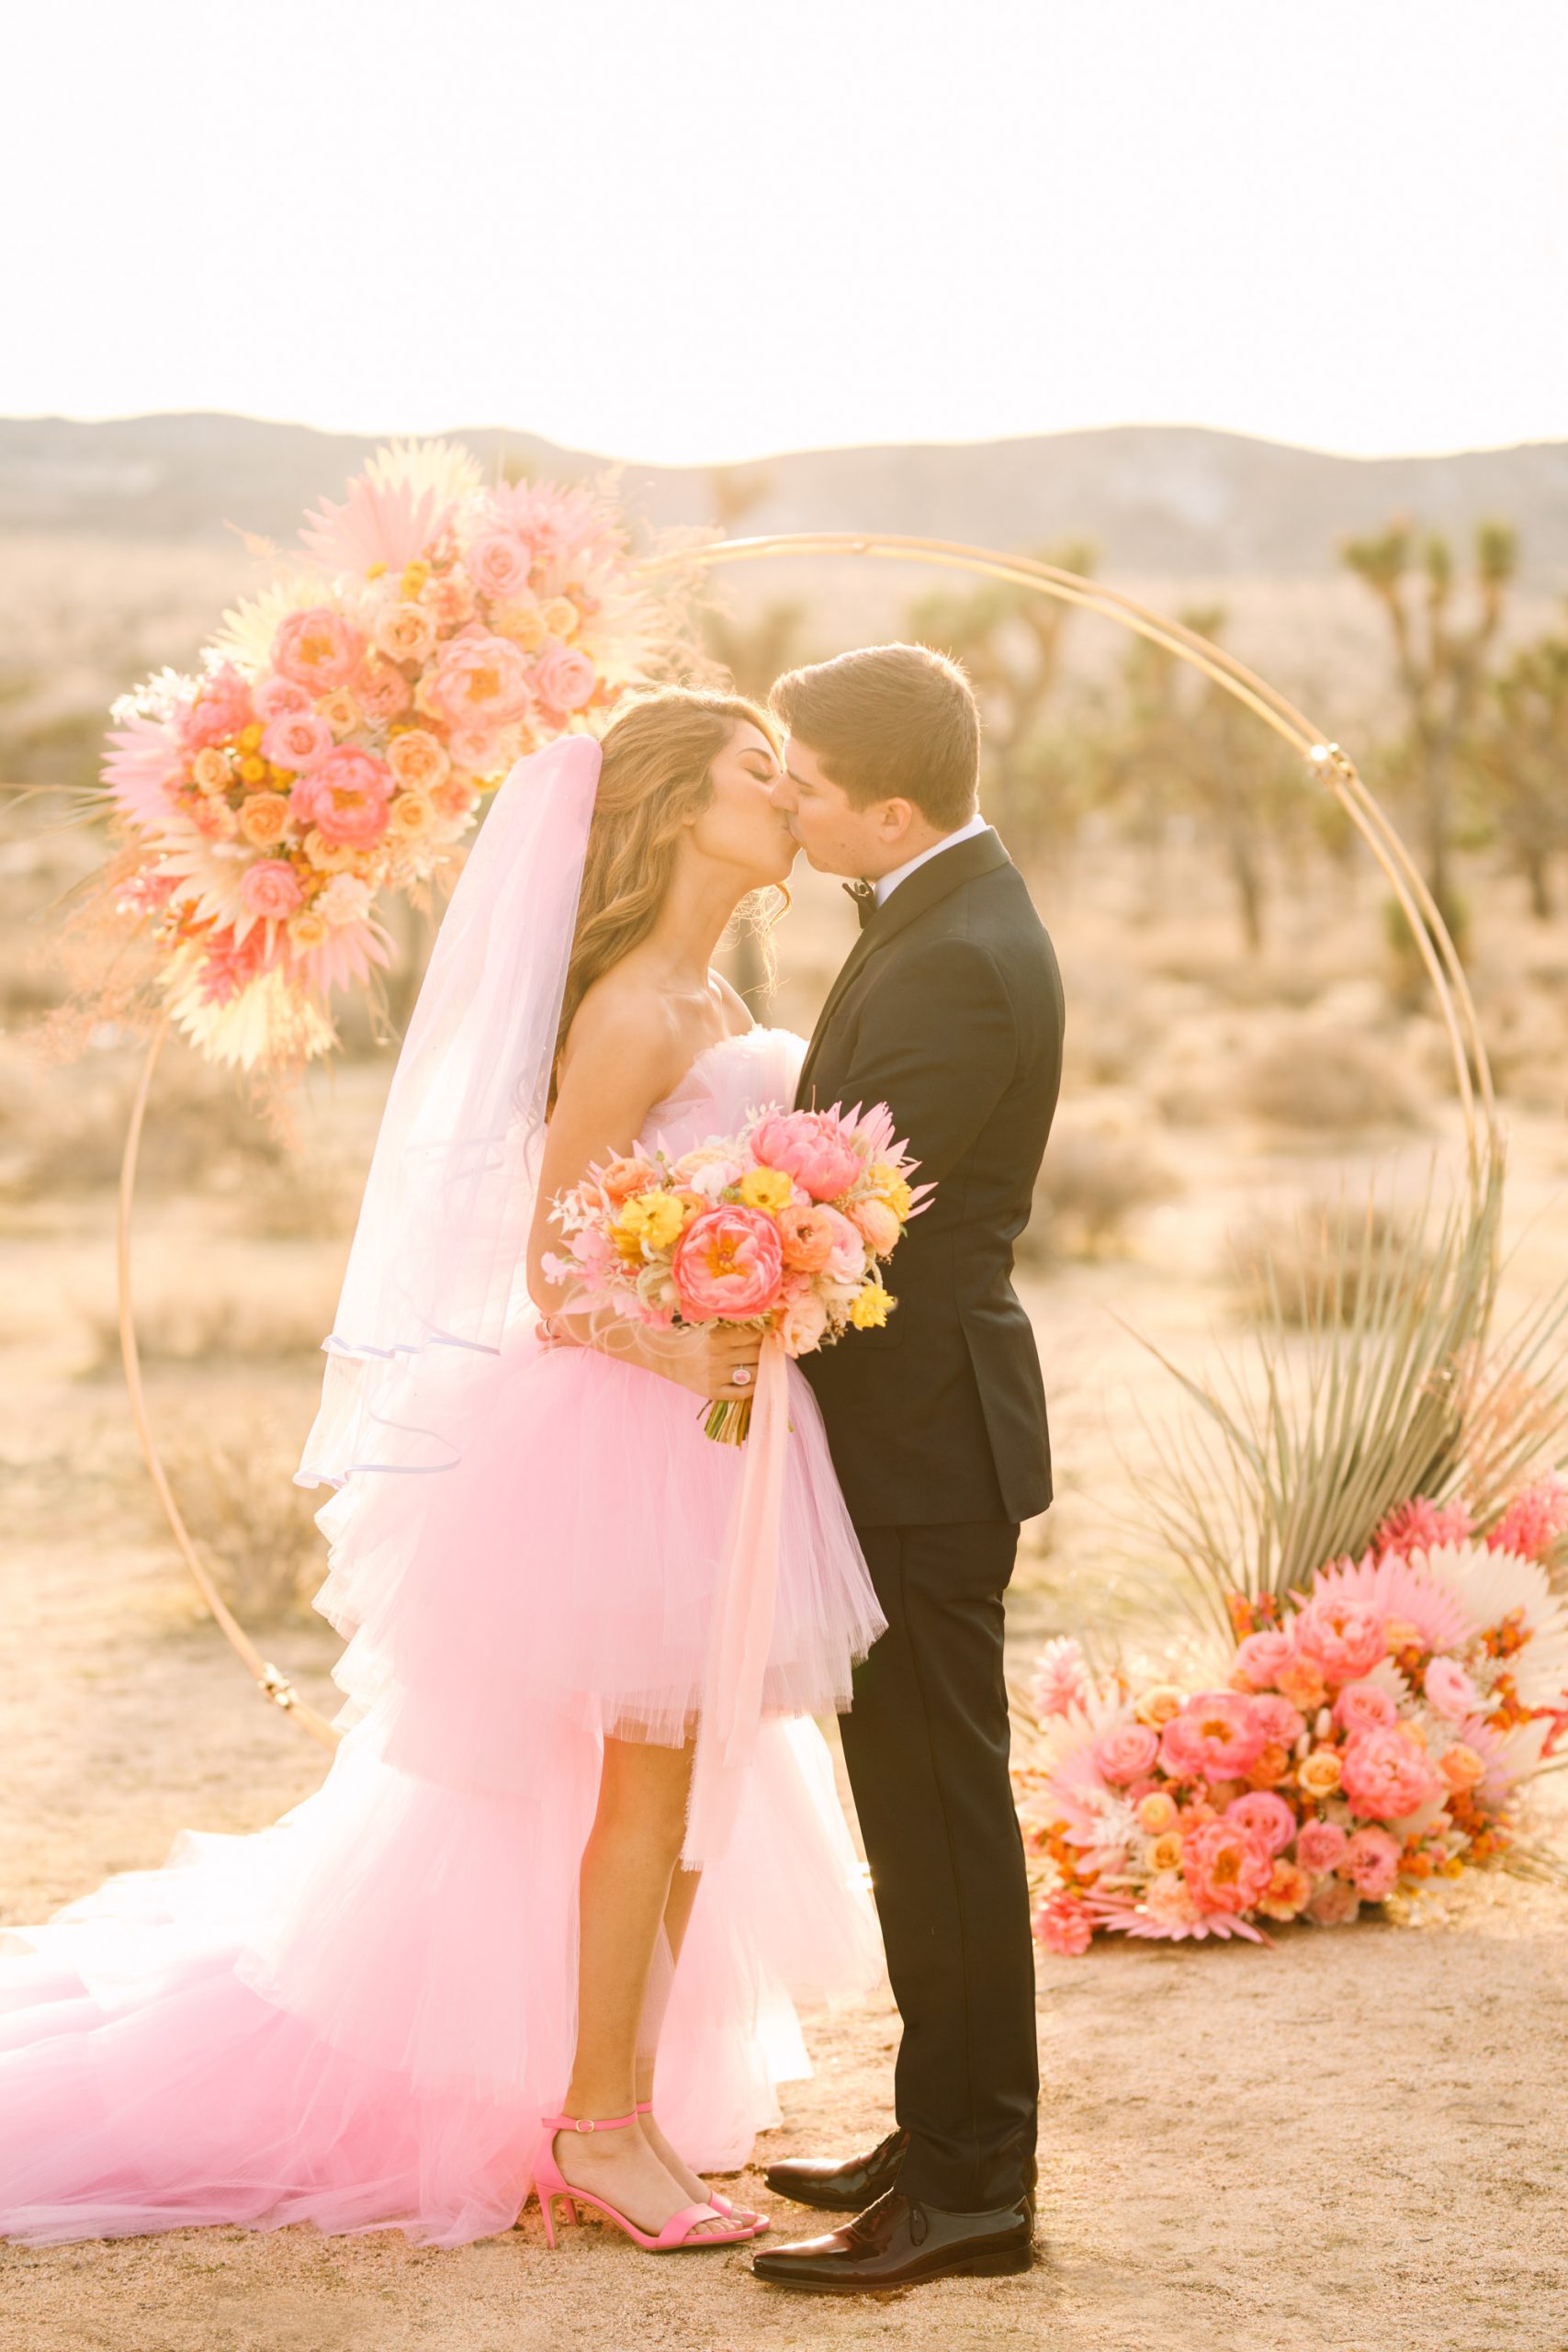 Bride and groom kissing in front of pink floral arch | Pink wedding dress Joshua Tree elopement featured on Green Wedding Shoes | Colorful desert wedding inspiration for fun-loving couples in Southern California #joshuatreewedding #joshuatreeelopement #pinkwedding #greenweddingshoes Source: Mary Costa Photography | Los Angeles